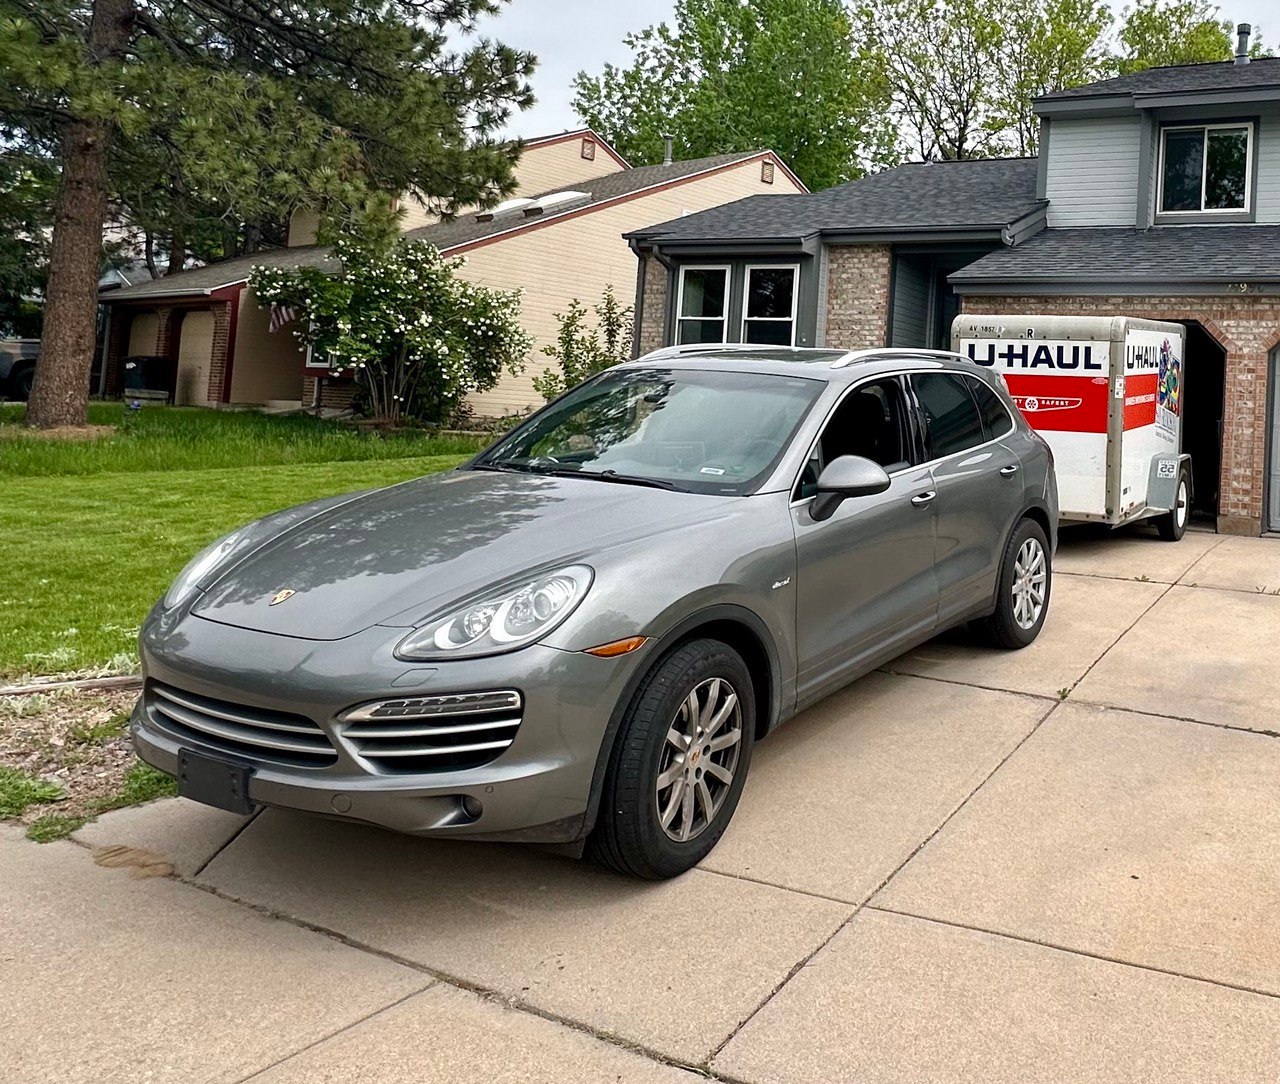 Porsche Cayenne in front of a house pulling a U-Haul trailer